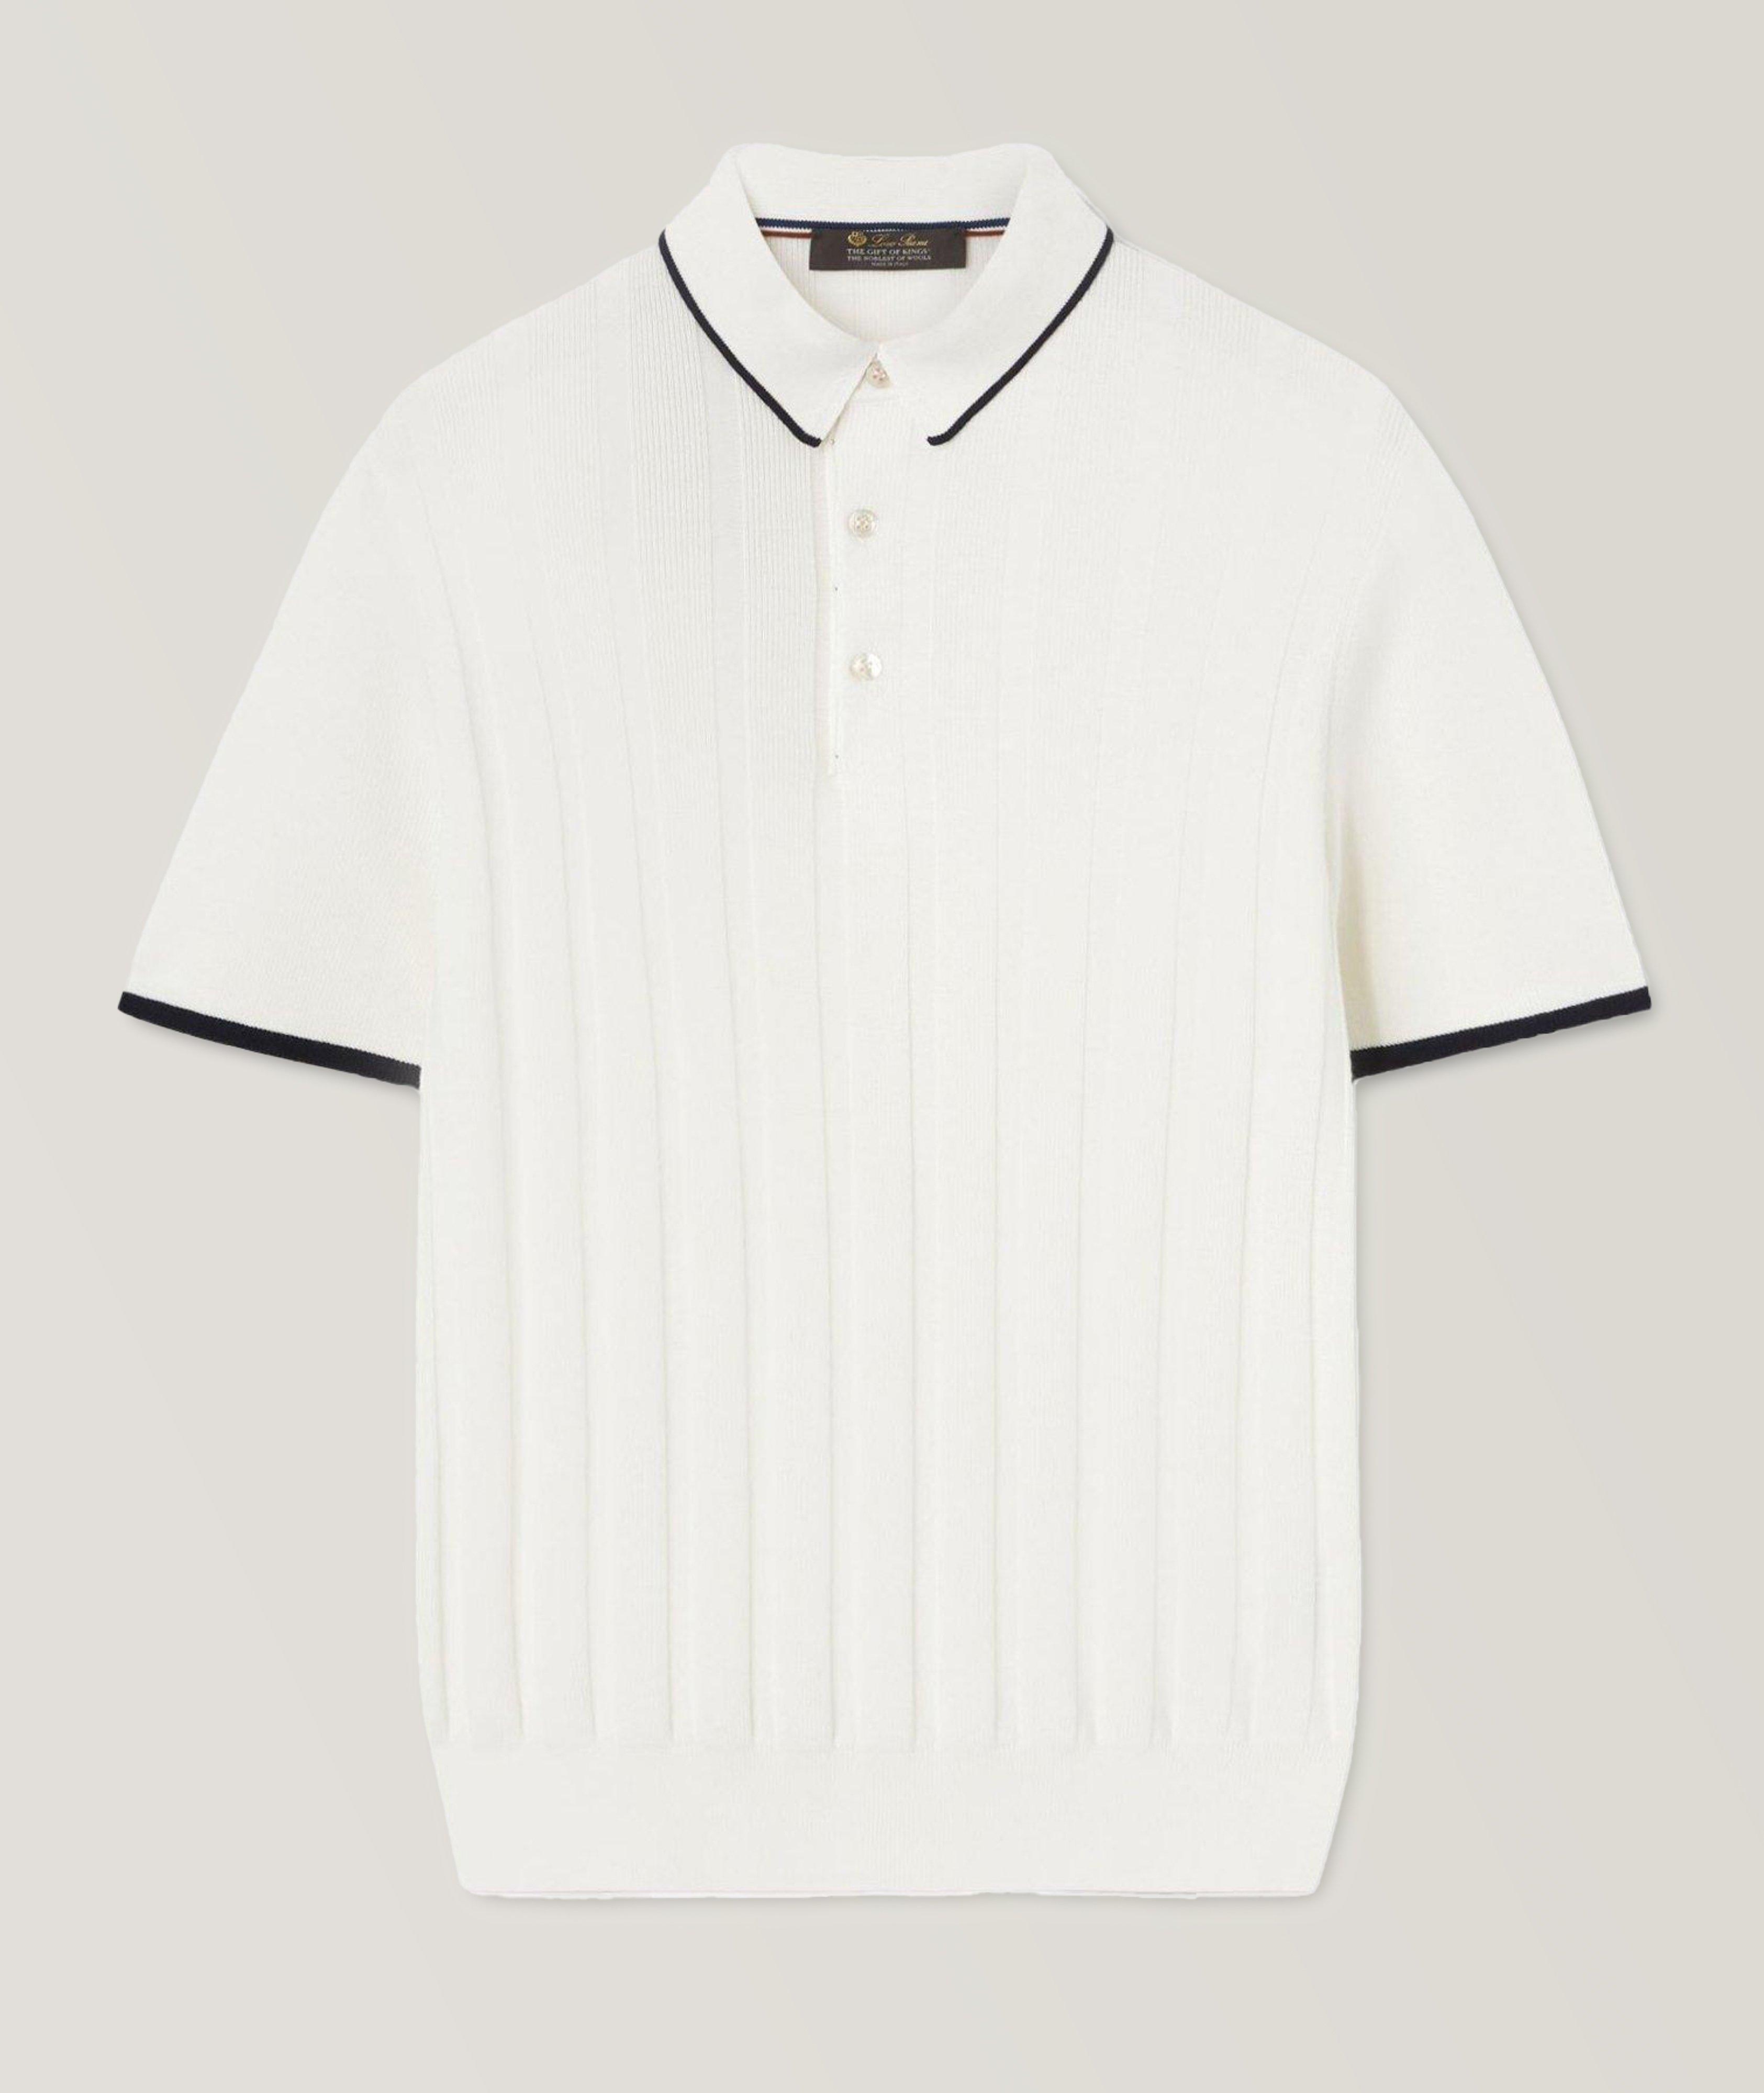 The Gift of Kings Rib Knit Wool Polo  image 0